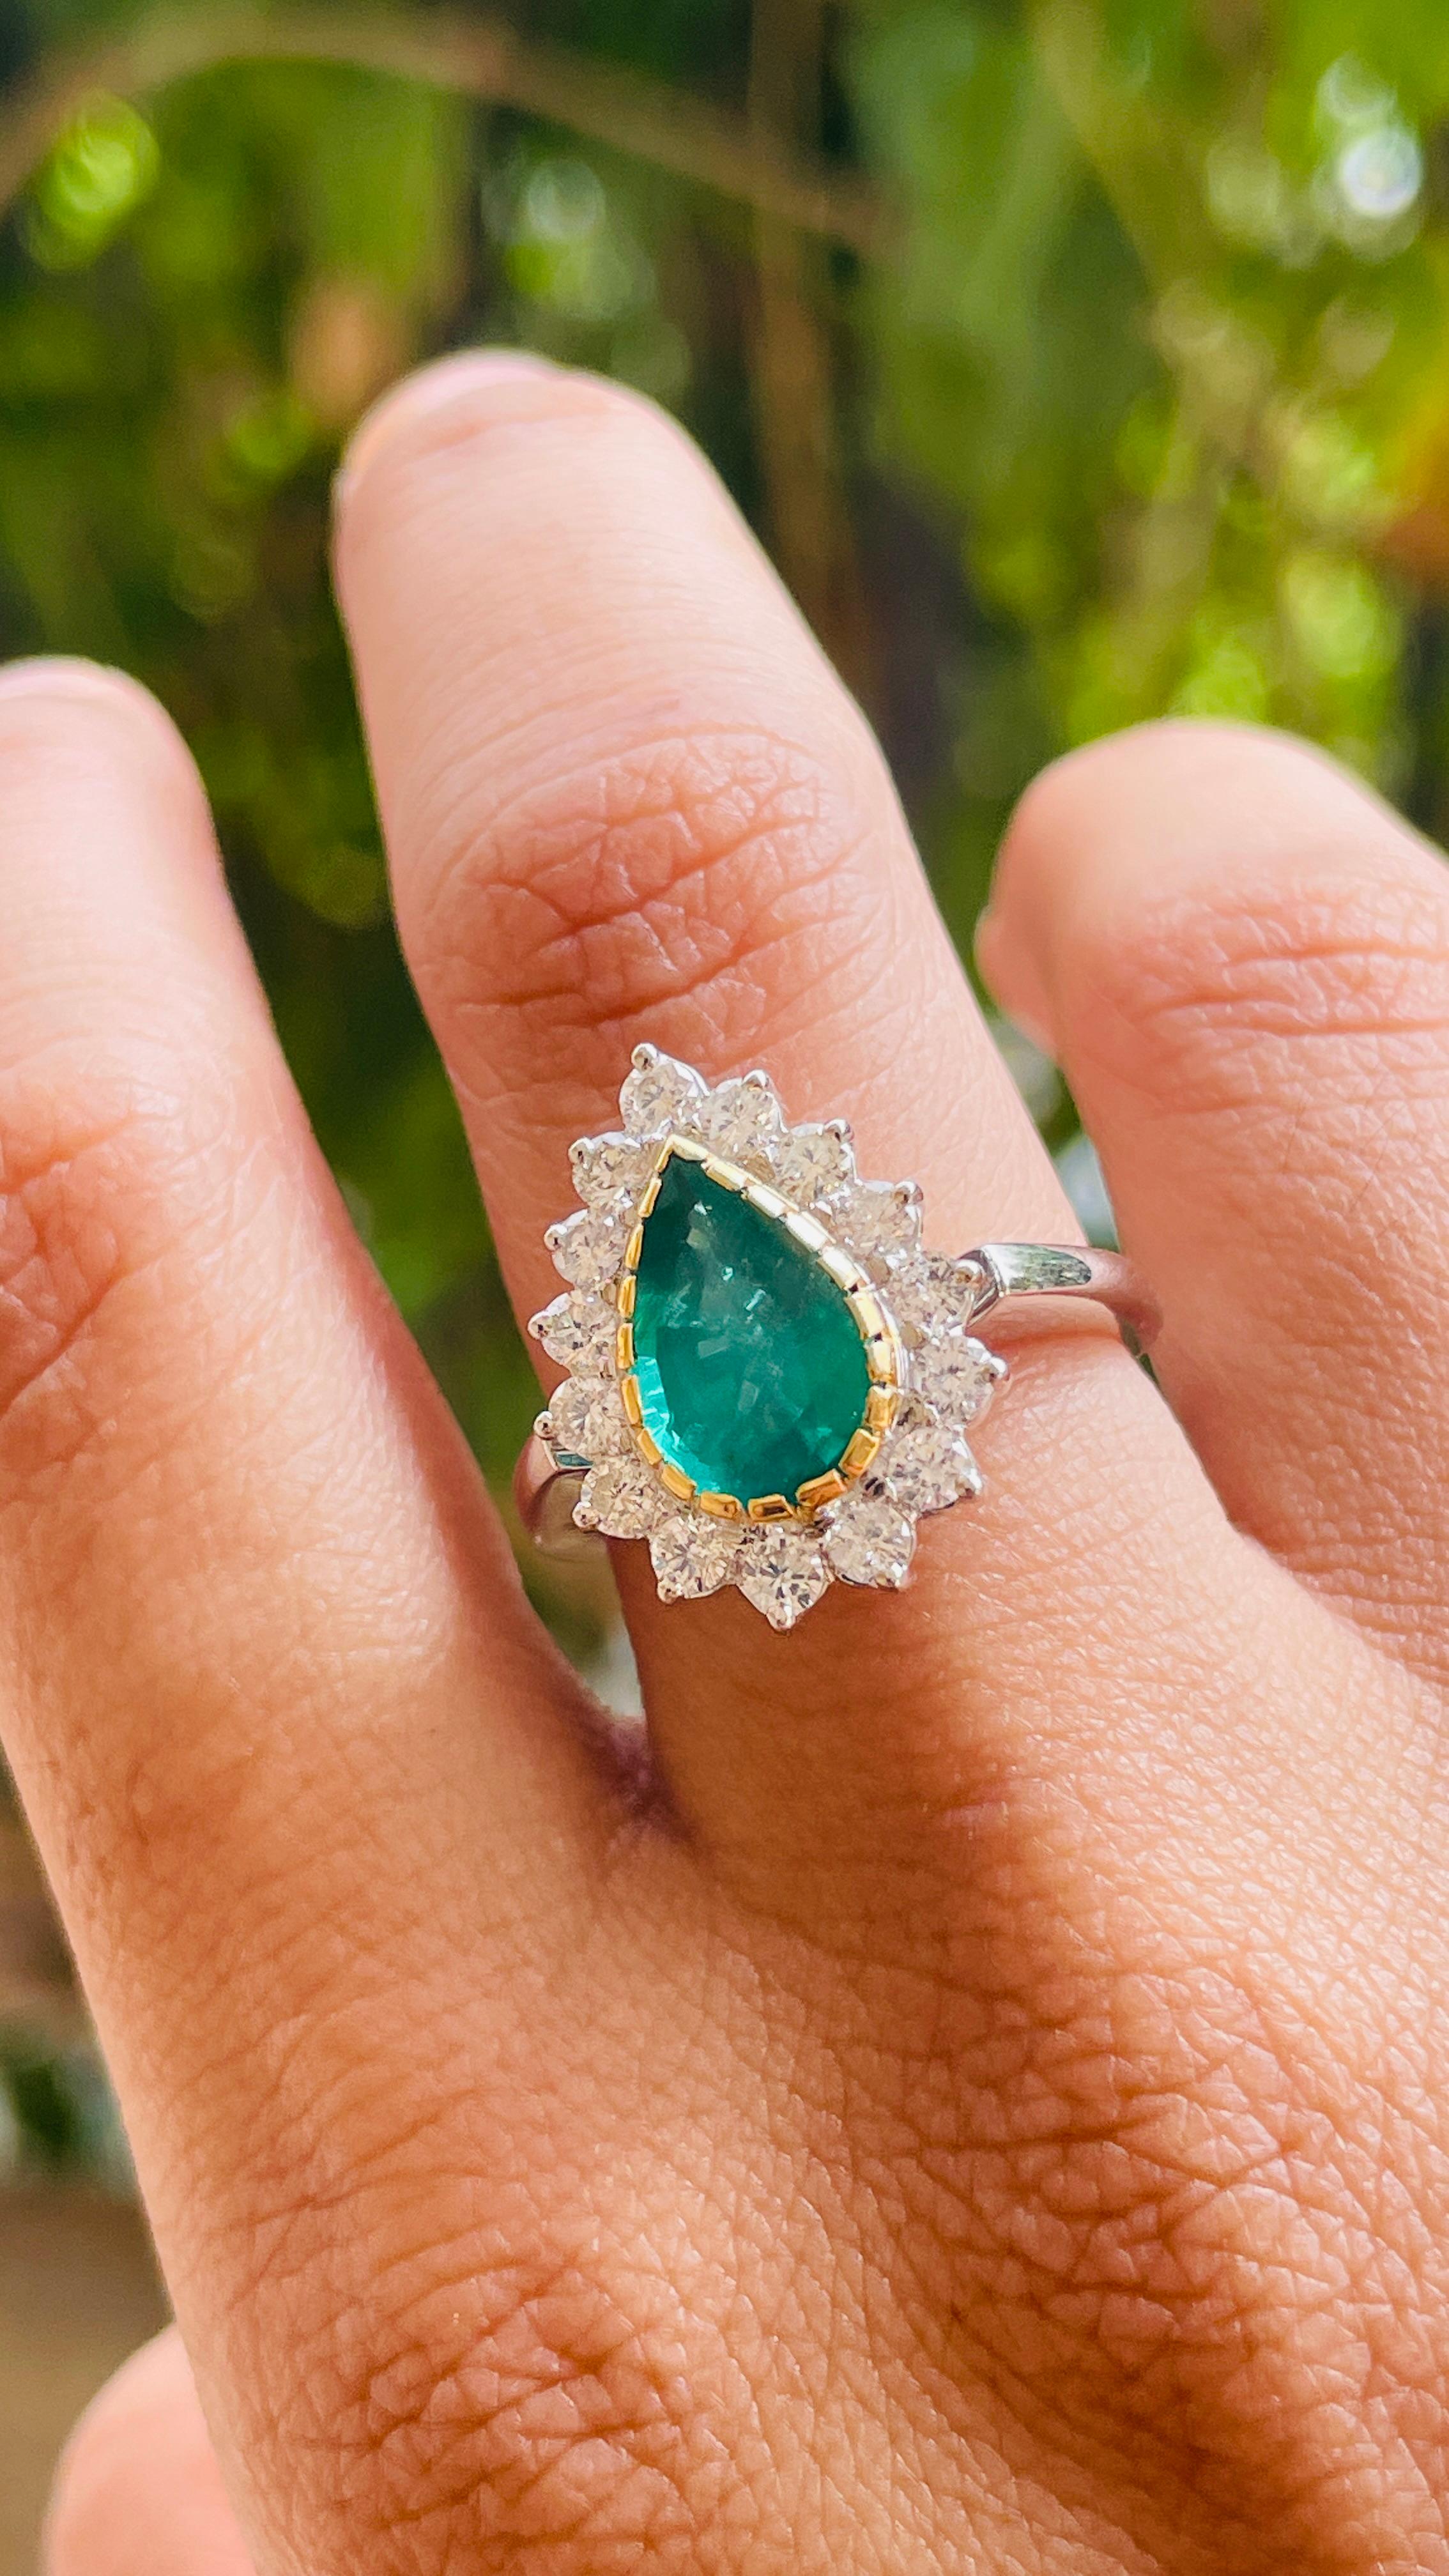 For Sale:  Statement 18k Solid White Gold Pear Emerald Halo Wedding Ring with Diamonds 4